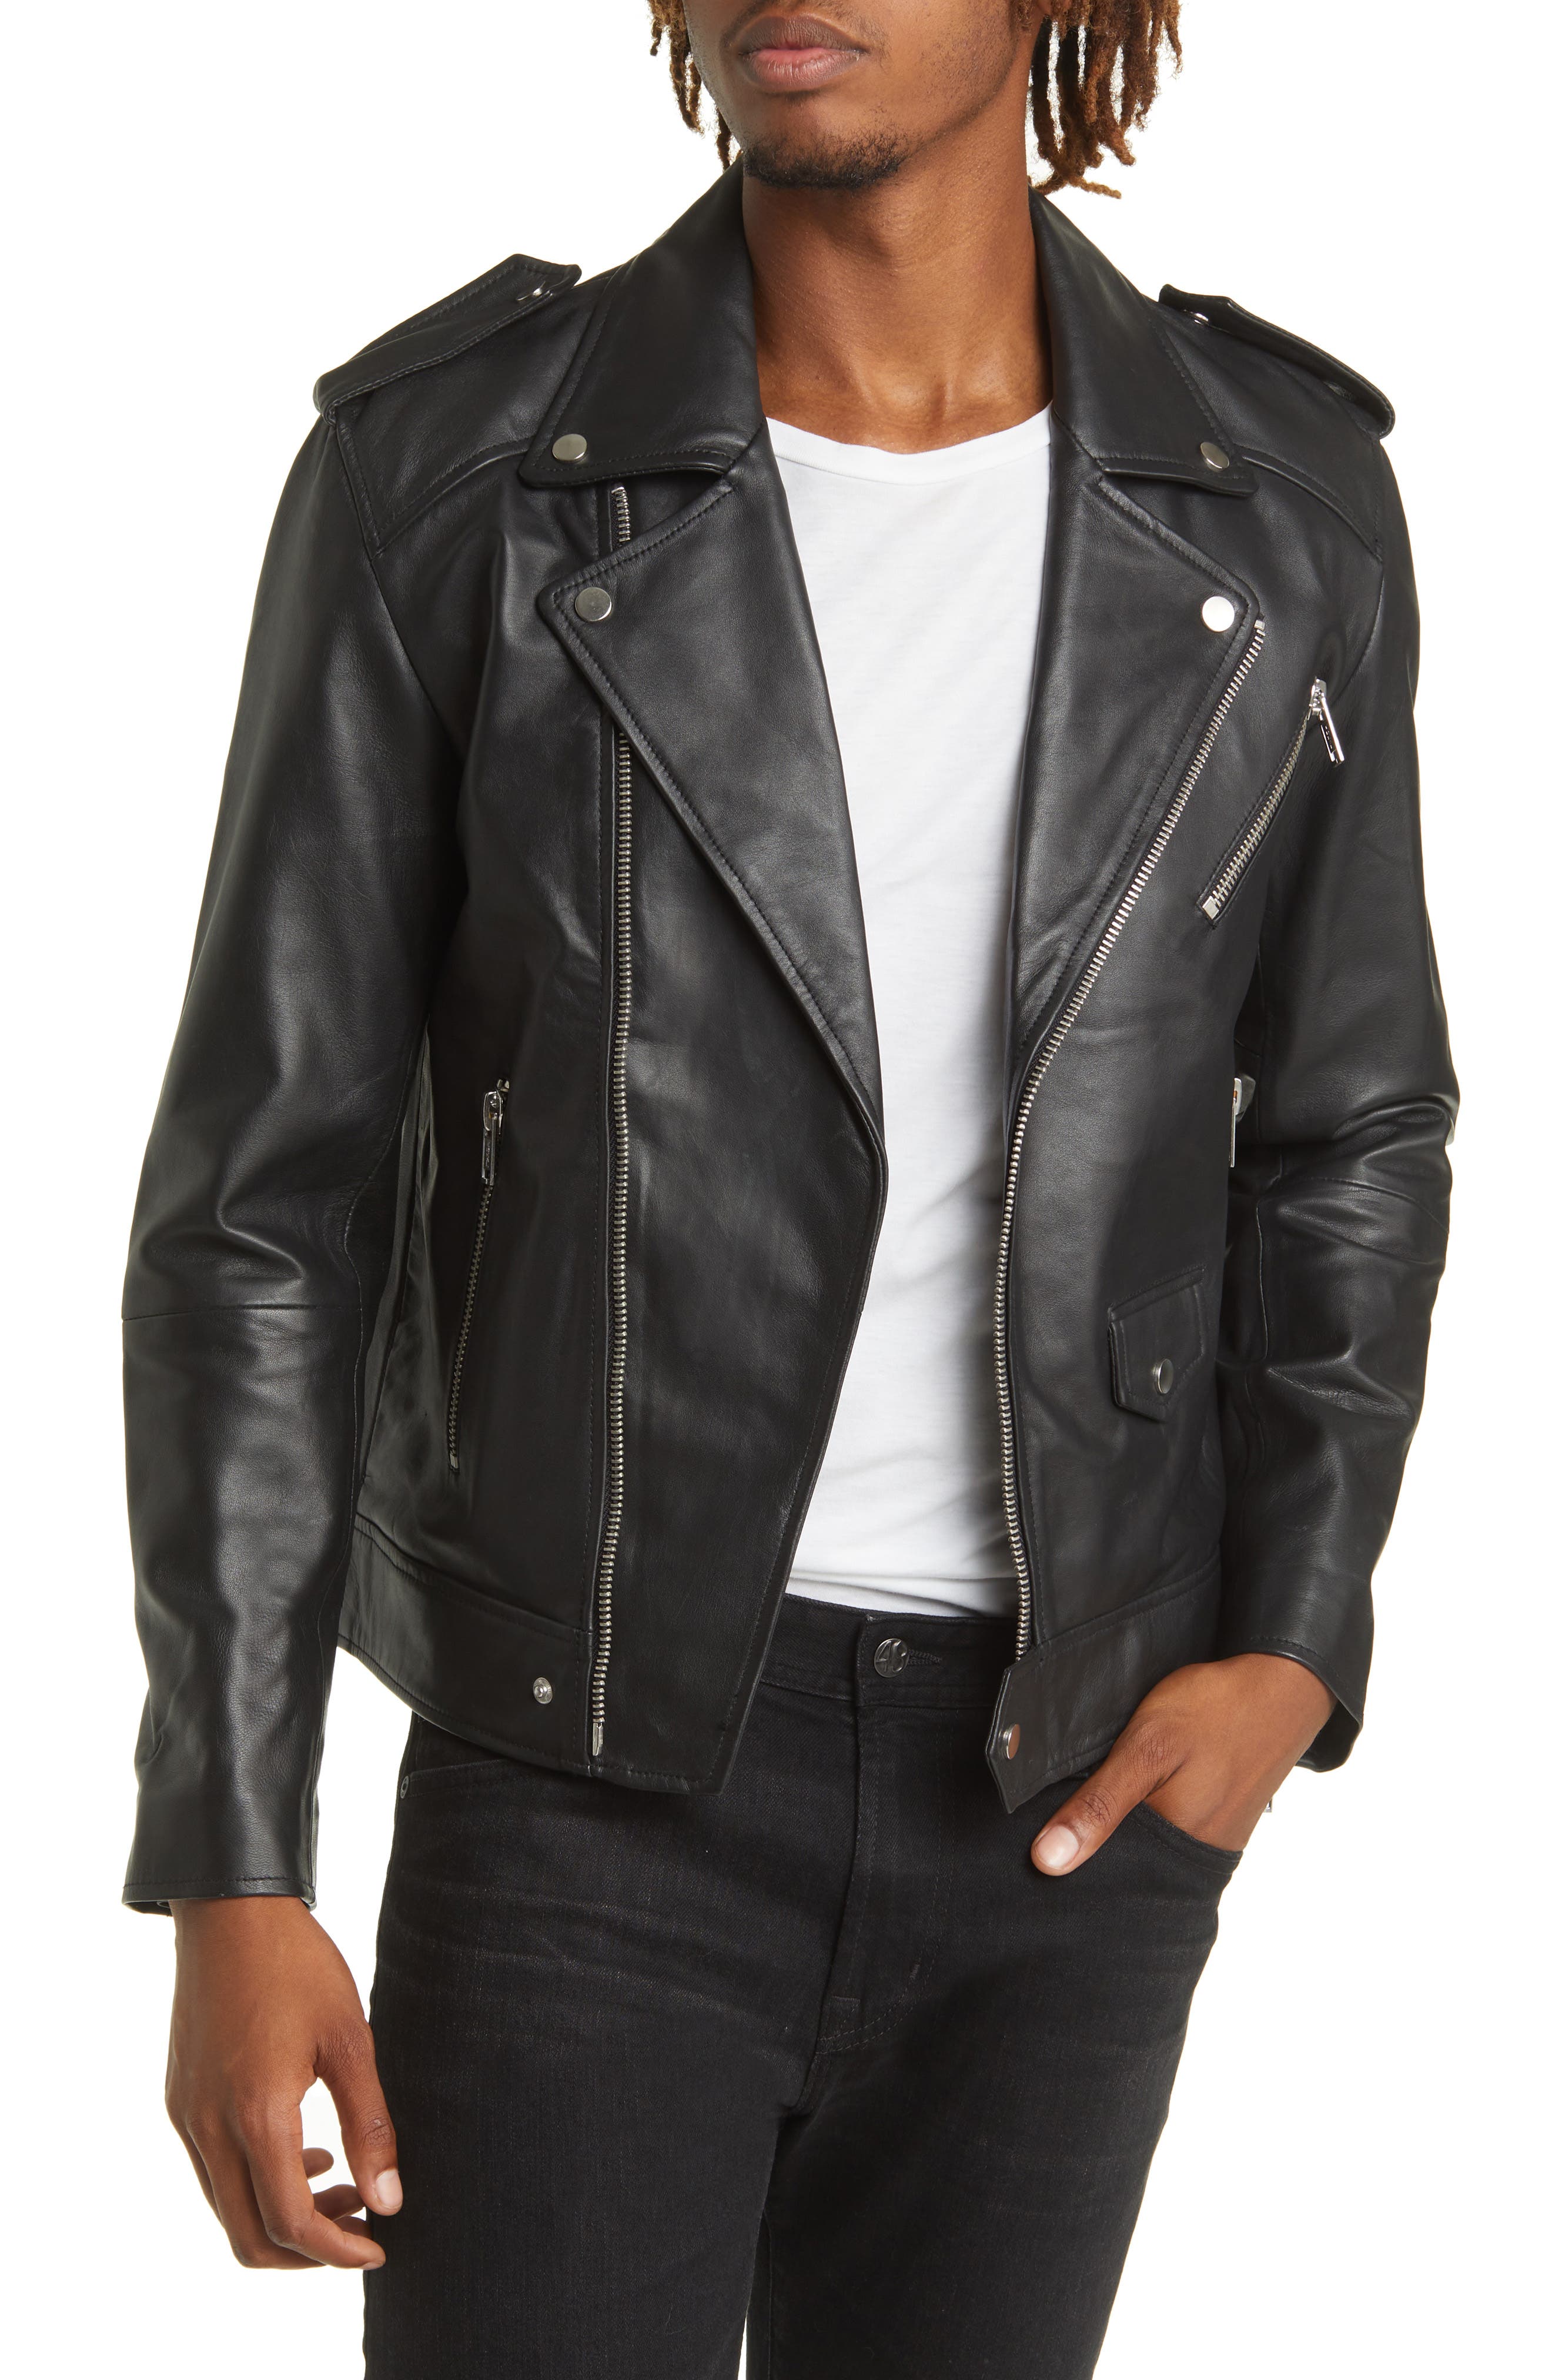 Prada Reversible Leather Jacket in Black for Men Mens Clothing Jackets Leather jackets 